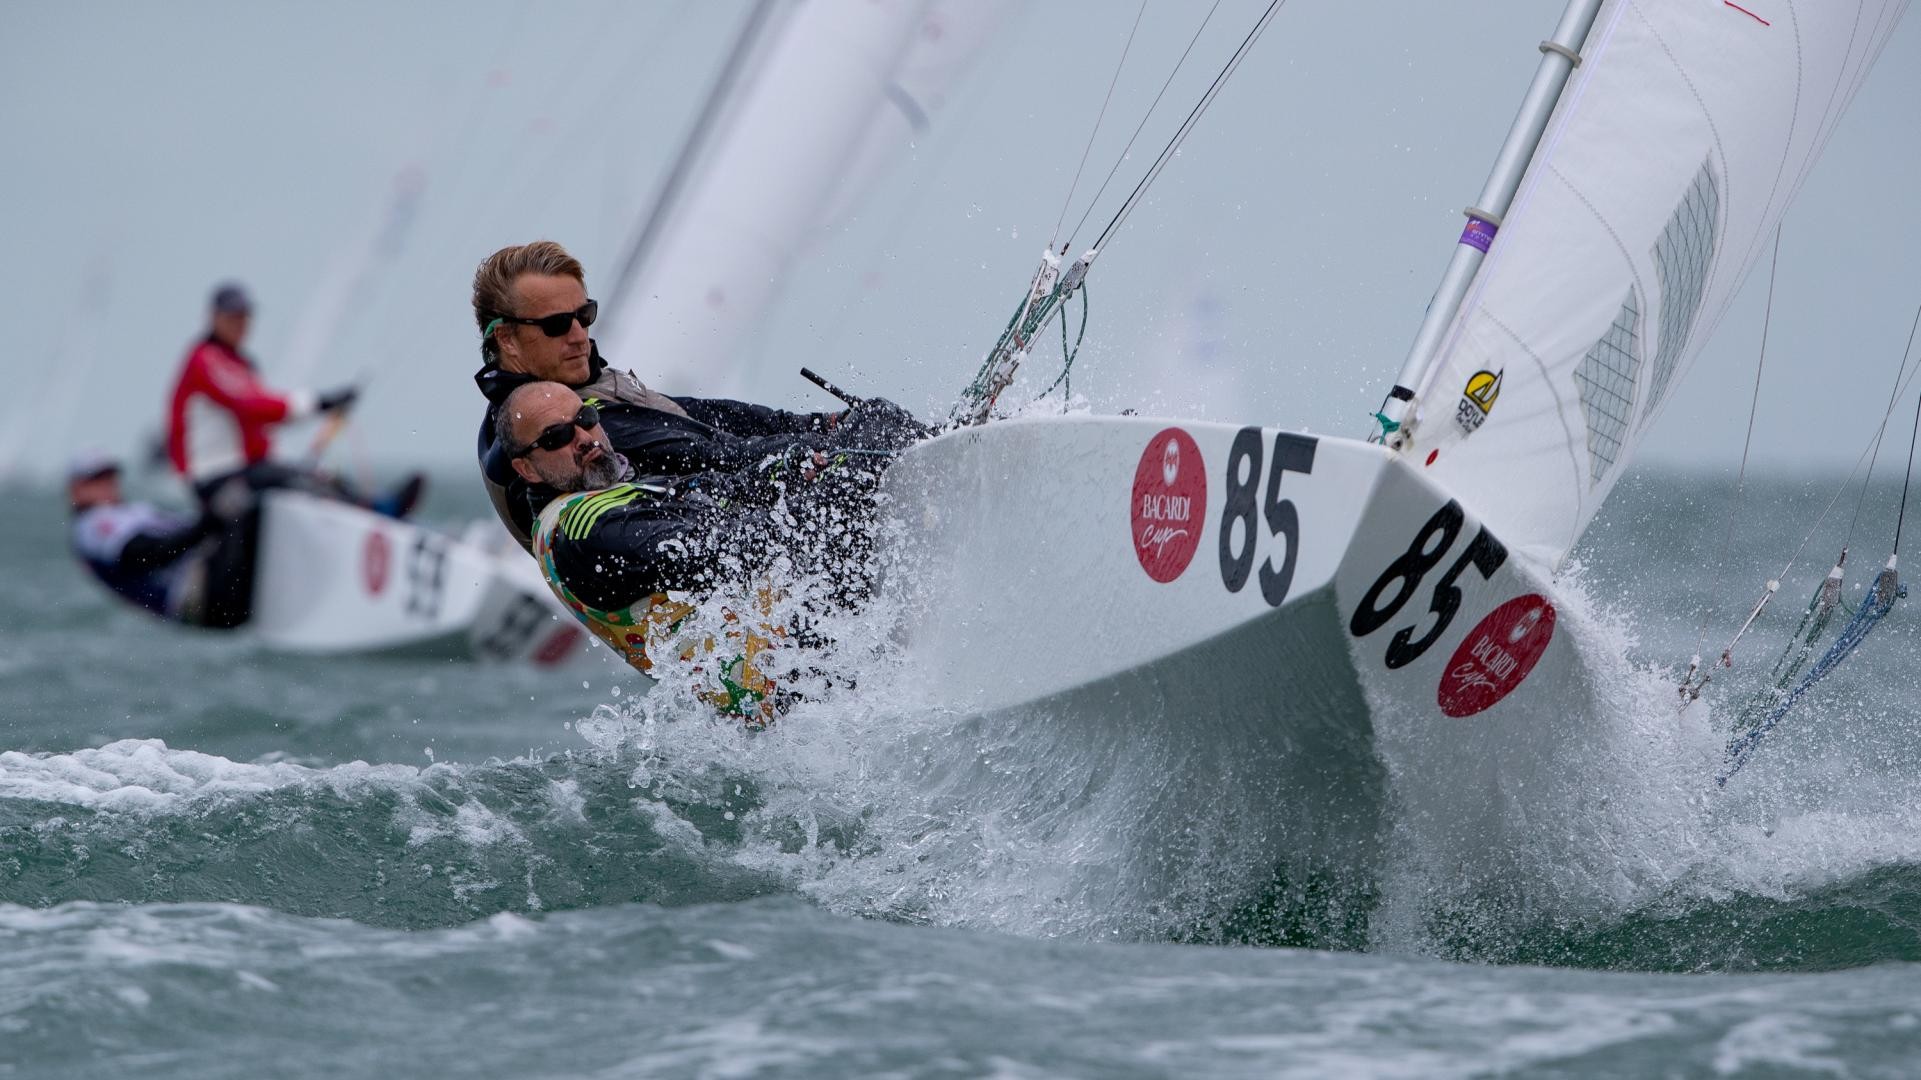 An epic opening day at the 94th Bacardi Cup on Biscayne Bay